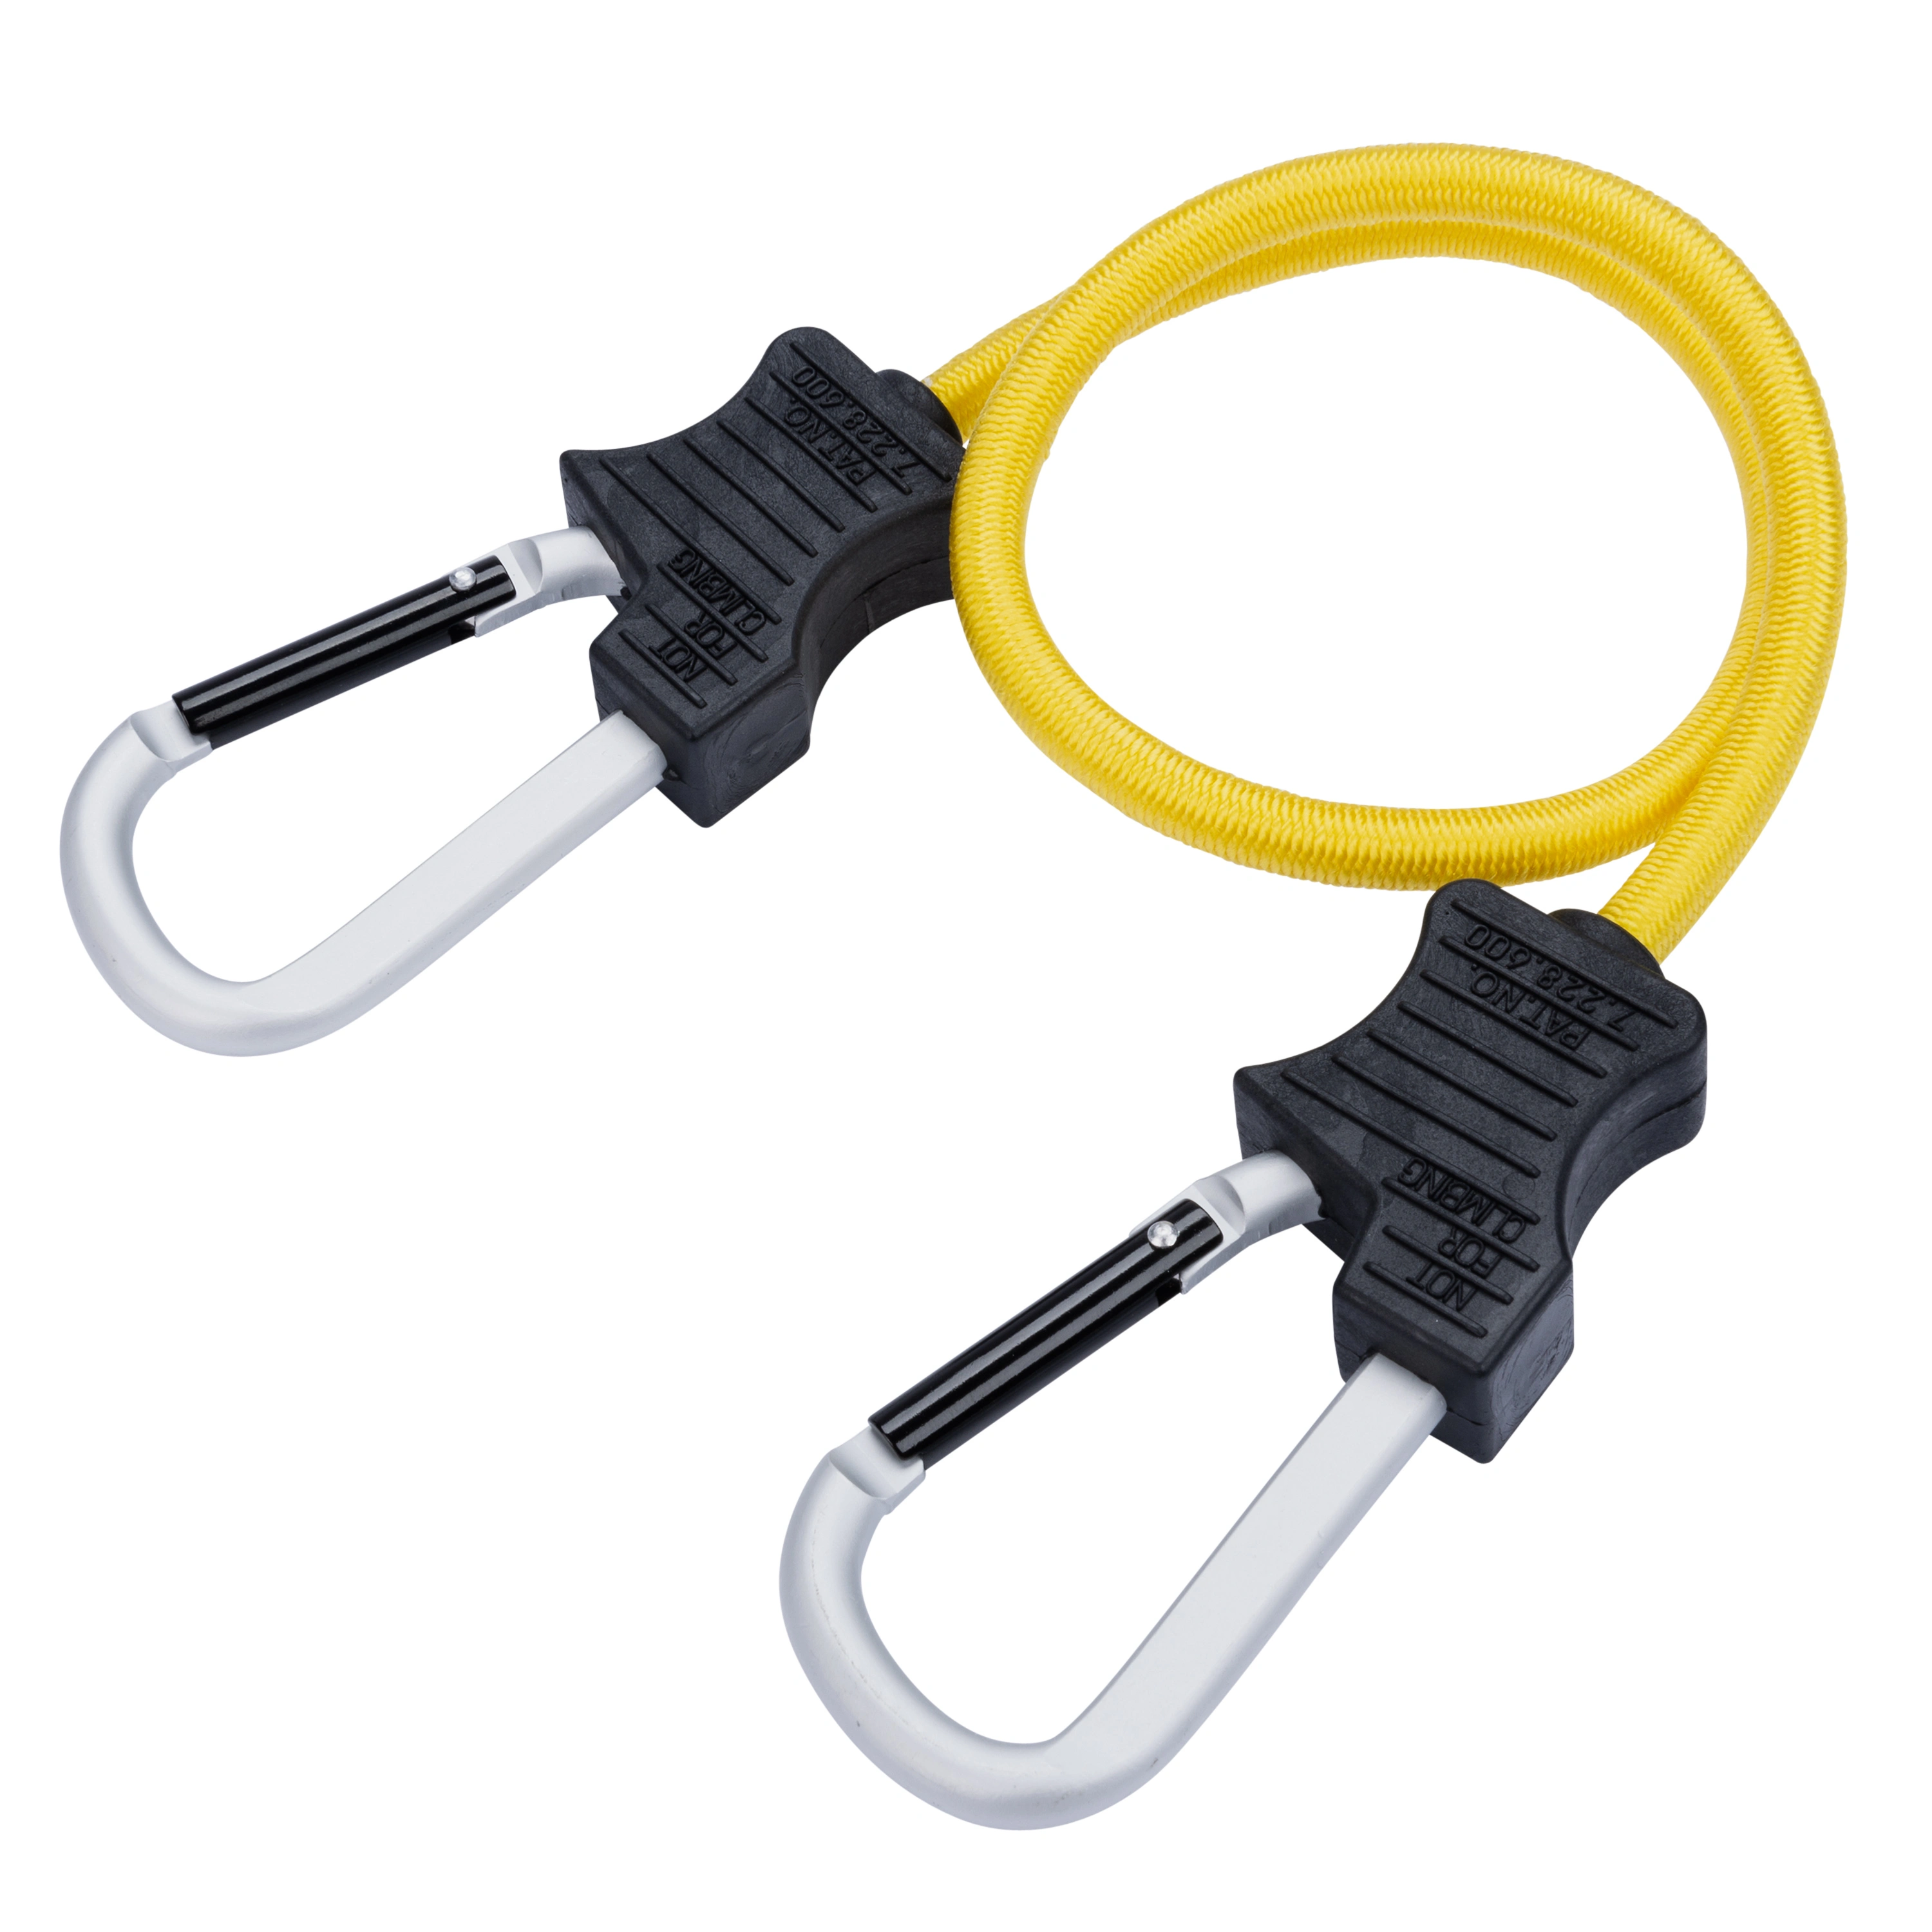 24" Carabiner Bungee Cord variant image view